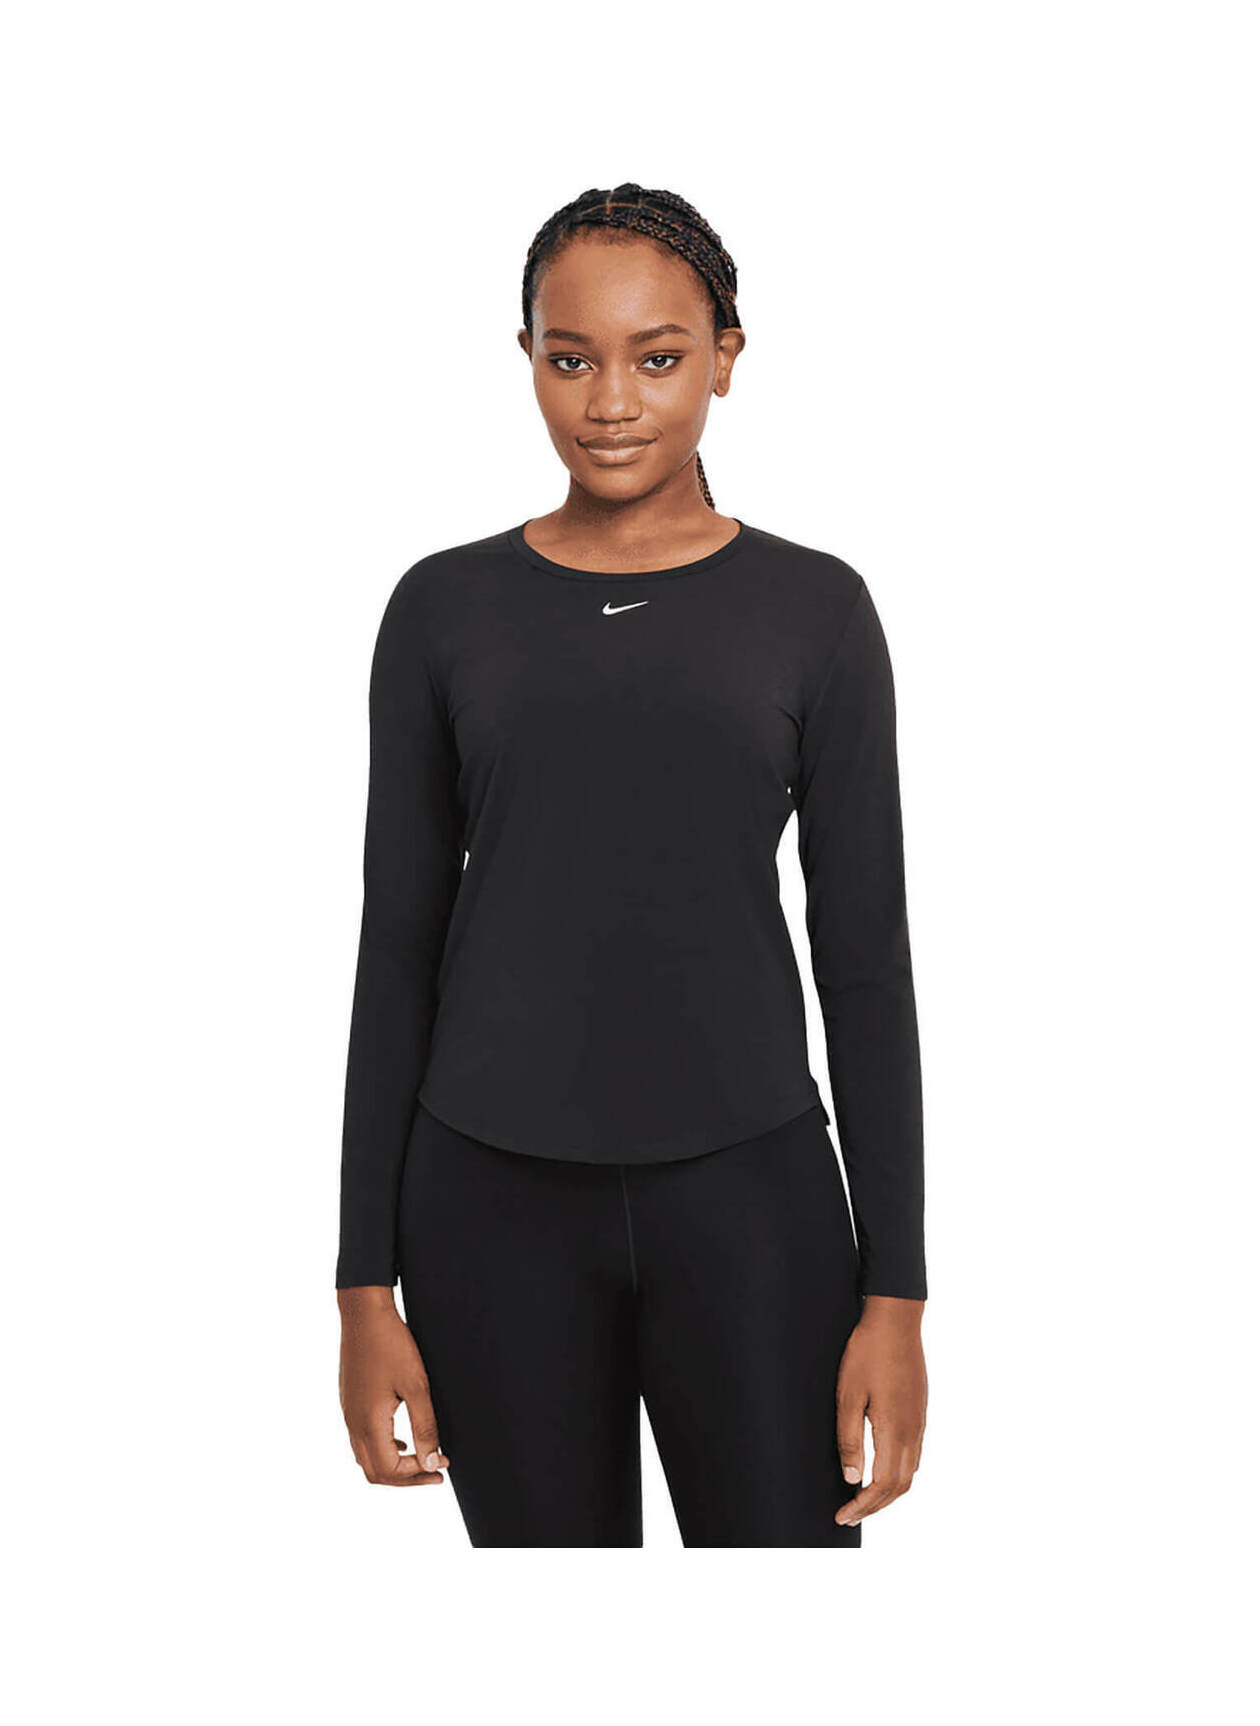 WOMEN'S NIKE DRI FIT ONE LUXE TIGHTS - NIKE - Women's - Clothing